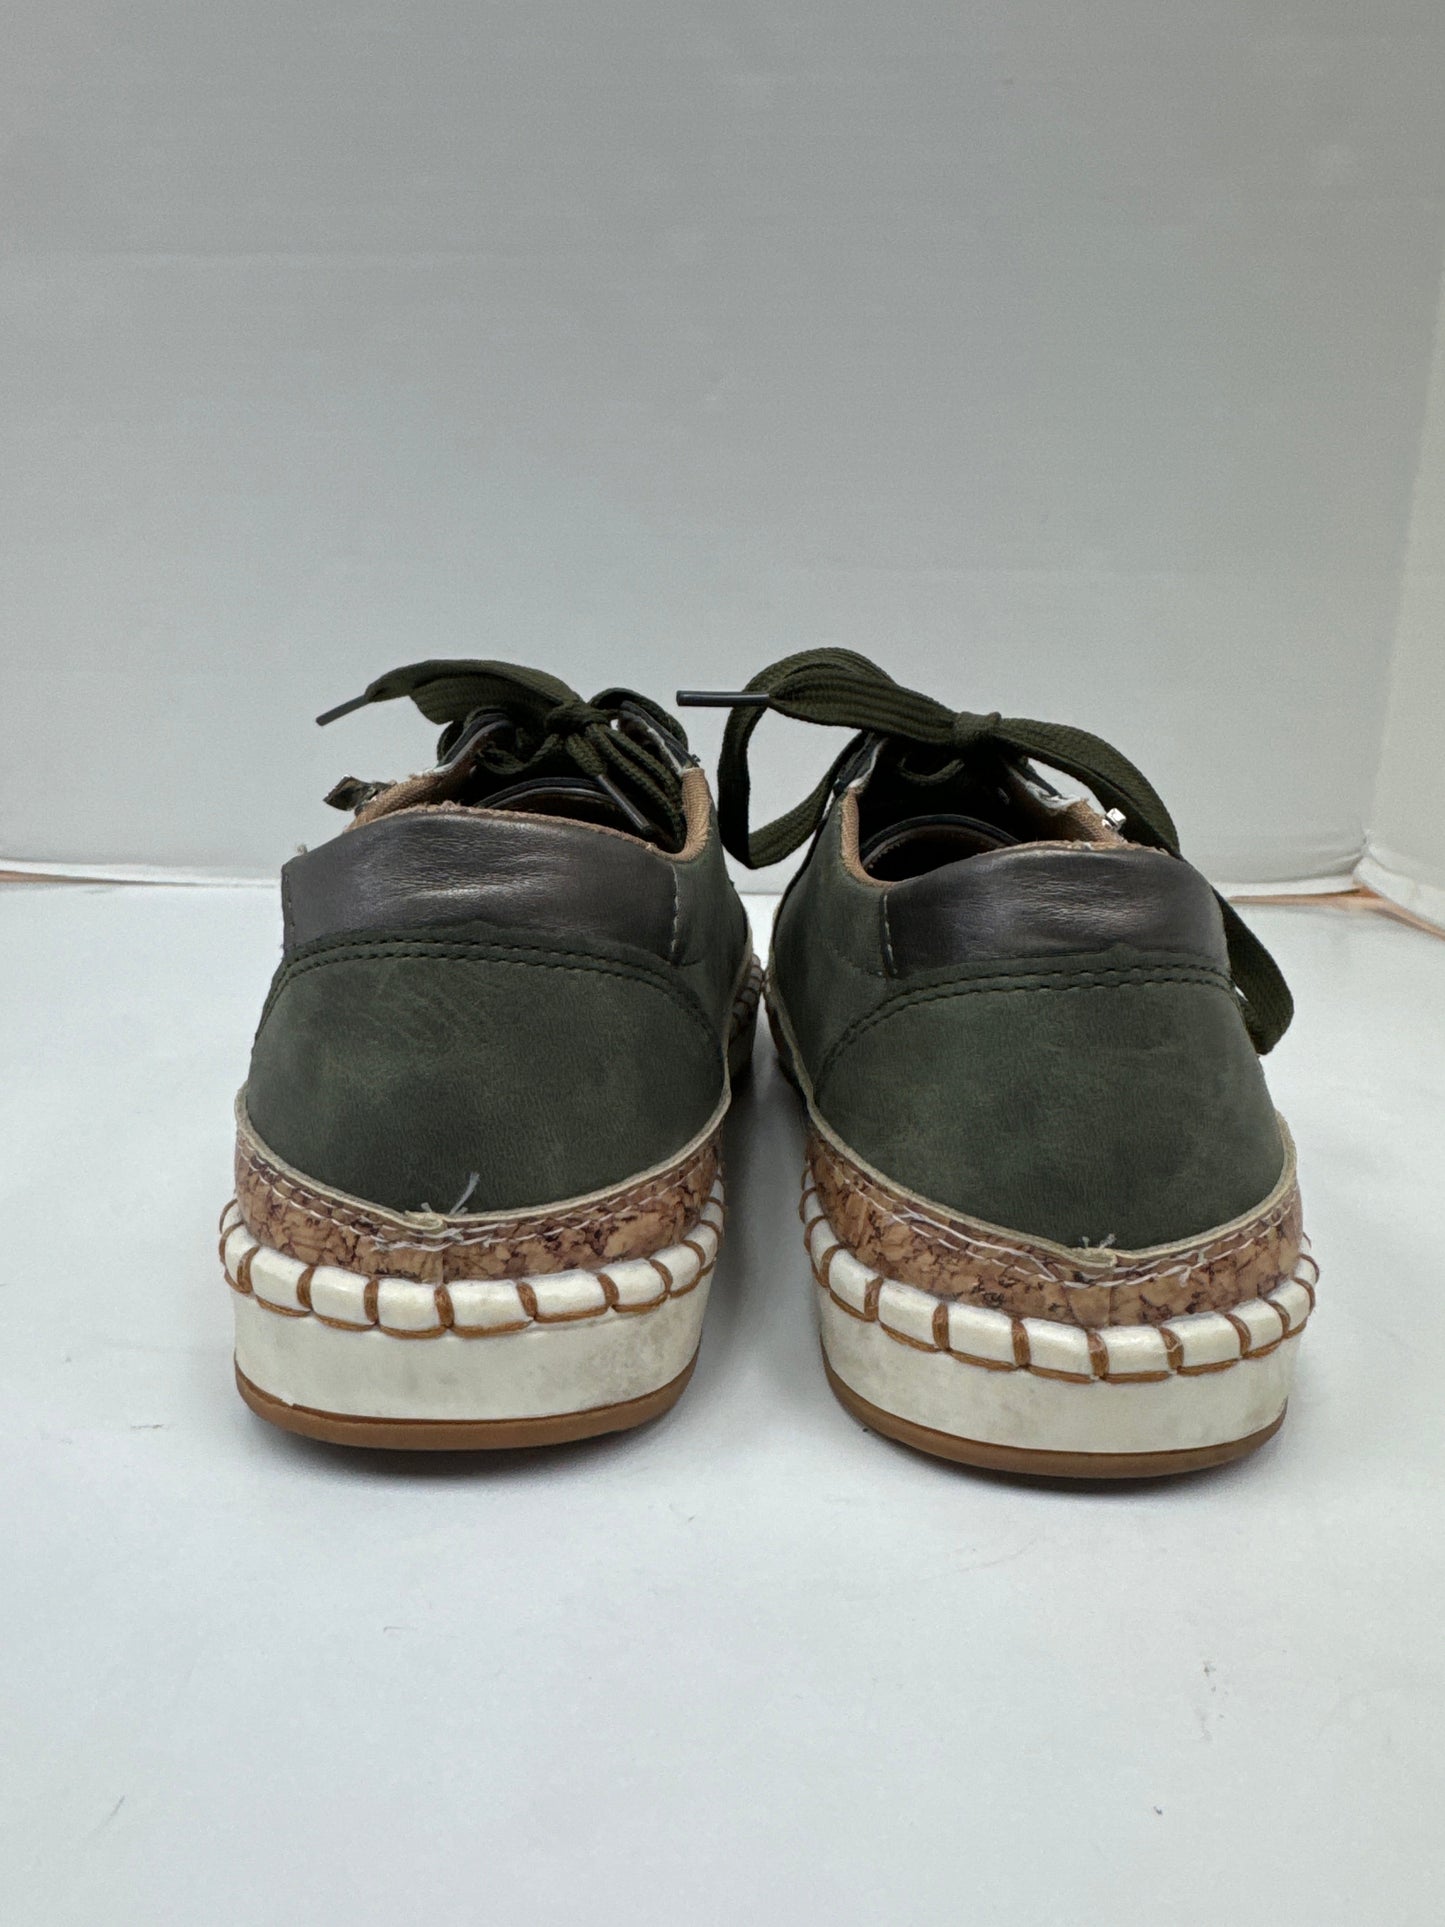 Green Shoes Flats Cme, Size 8.5